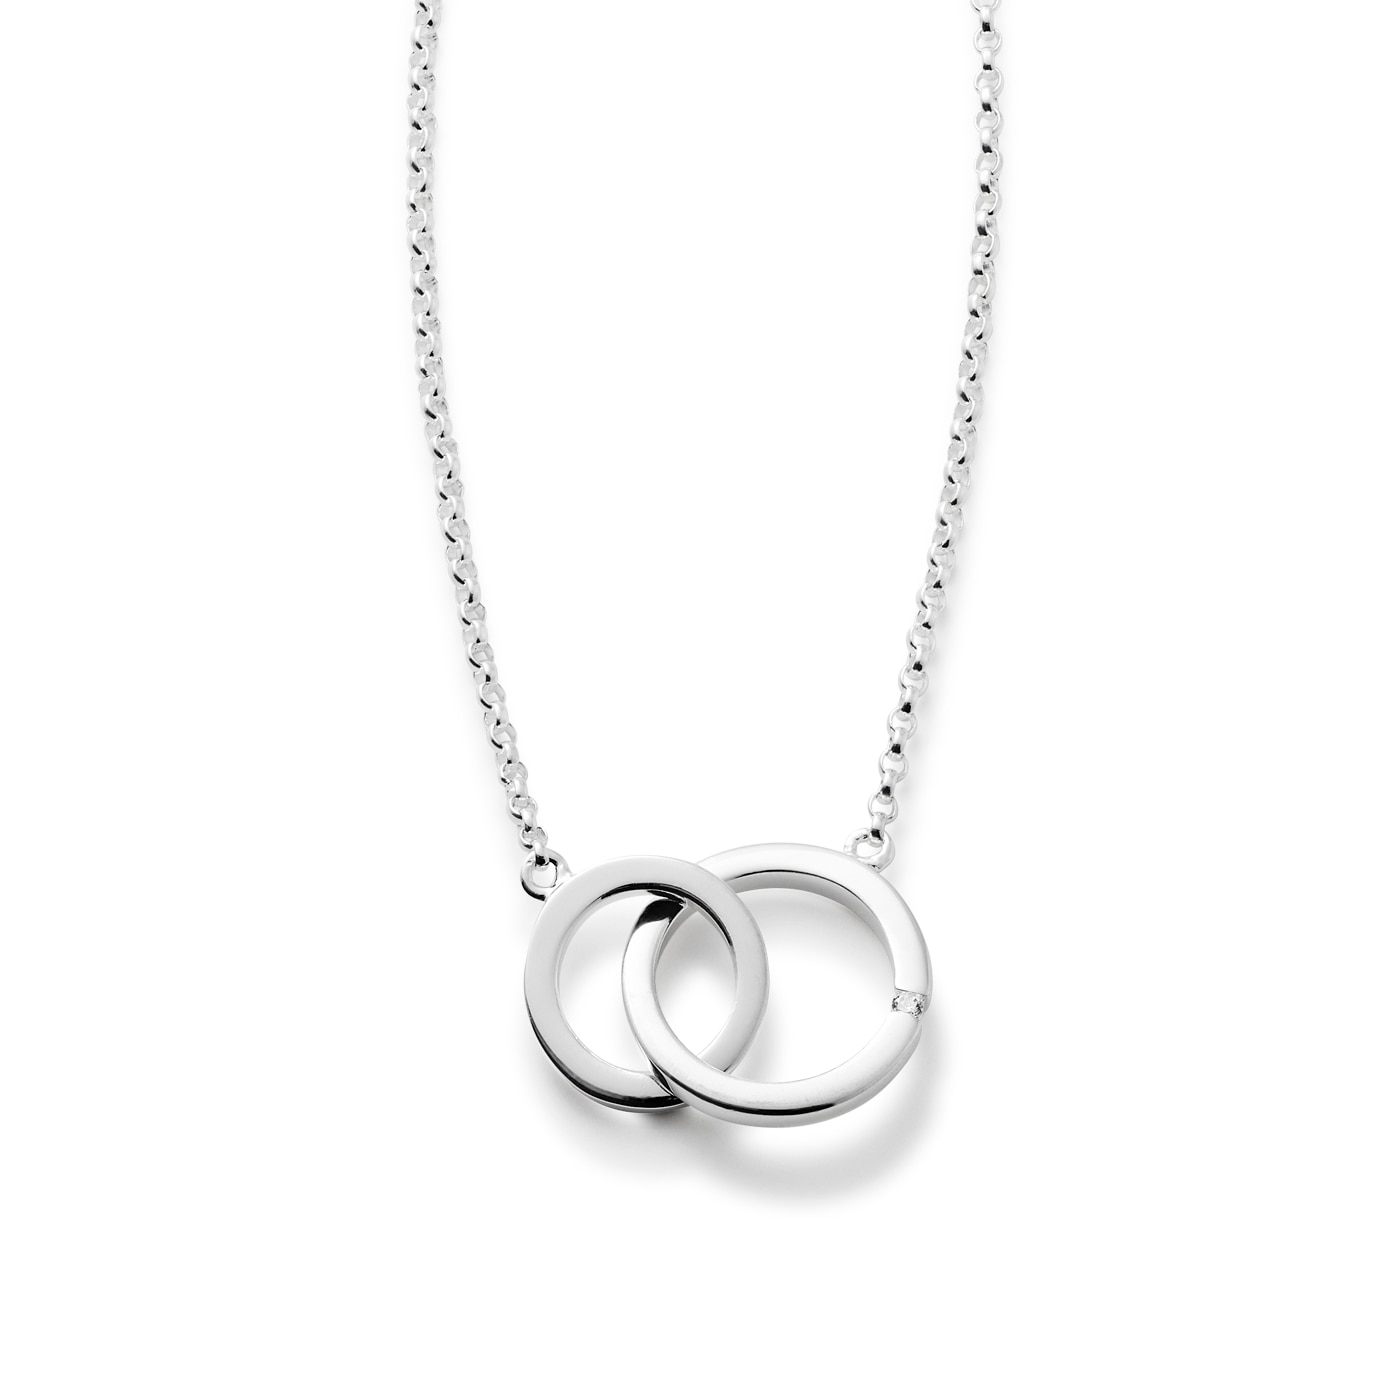 Two circles major necklace